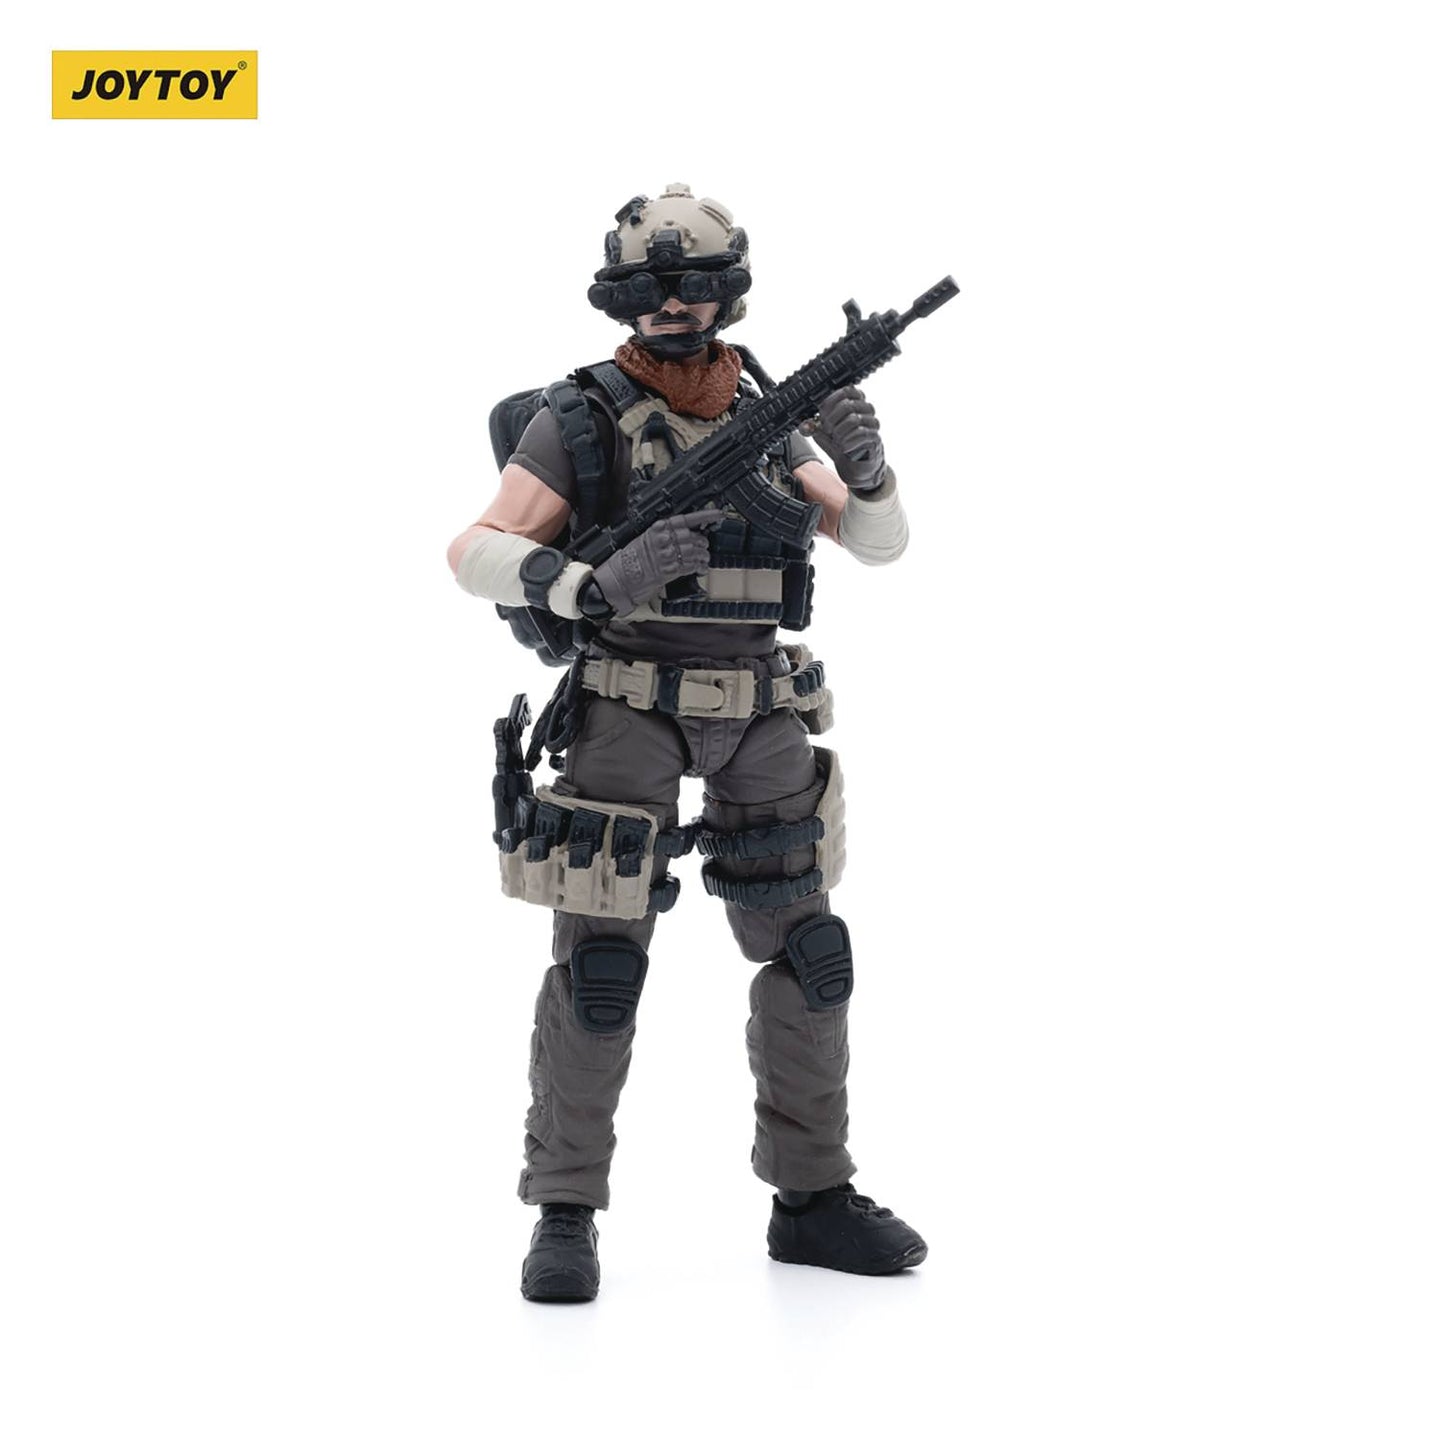 JOYTOY YEARLY ARMY BUILDER PROMOTION PACK FIGURE 05 1/18 FIG